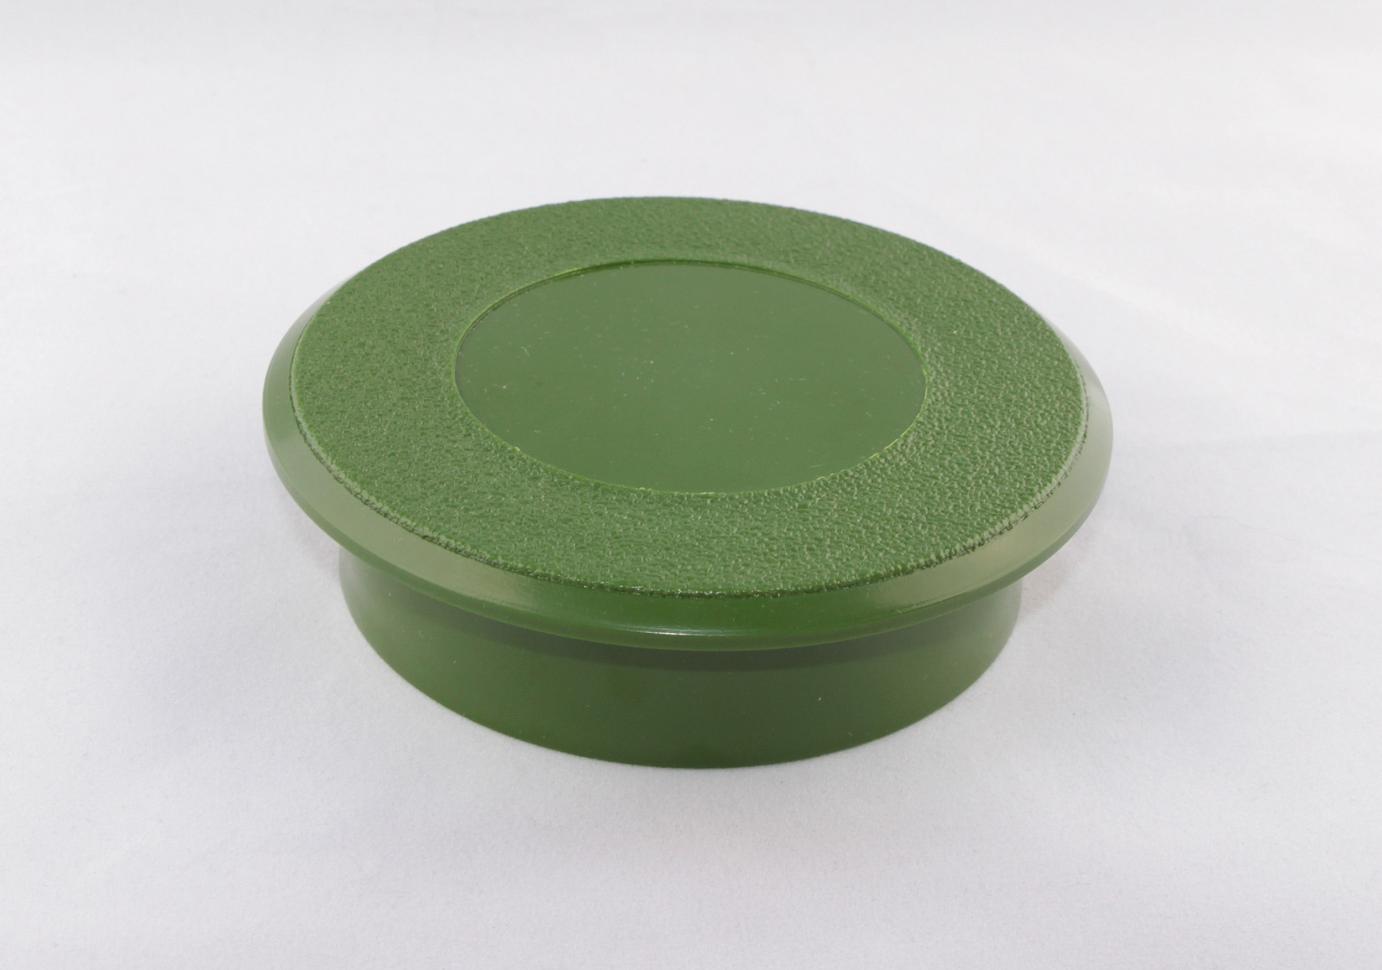 Putting Green Cup Cover; Green Cup Cover Synthetic Grass Tools